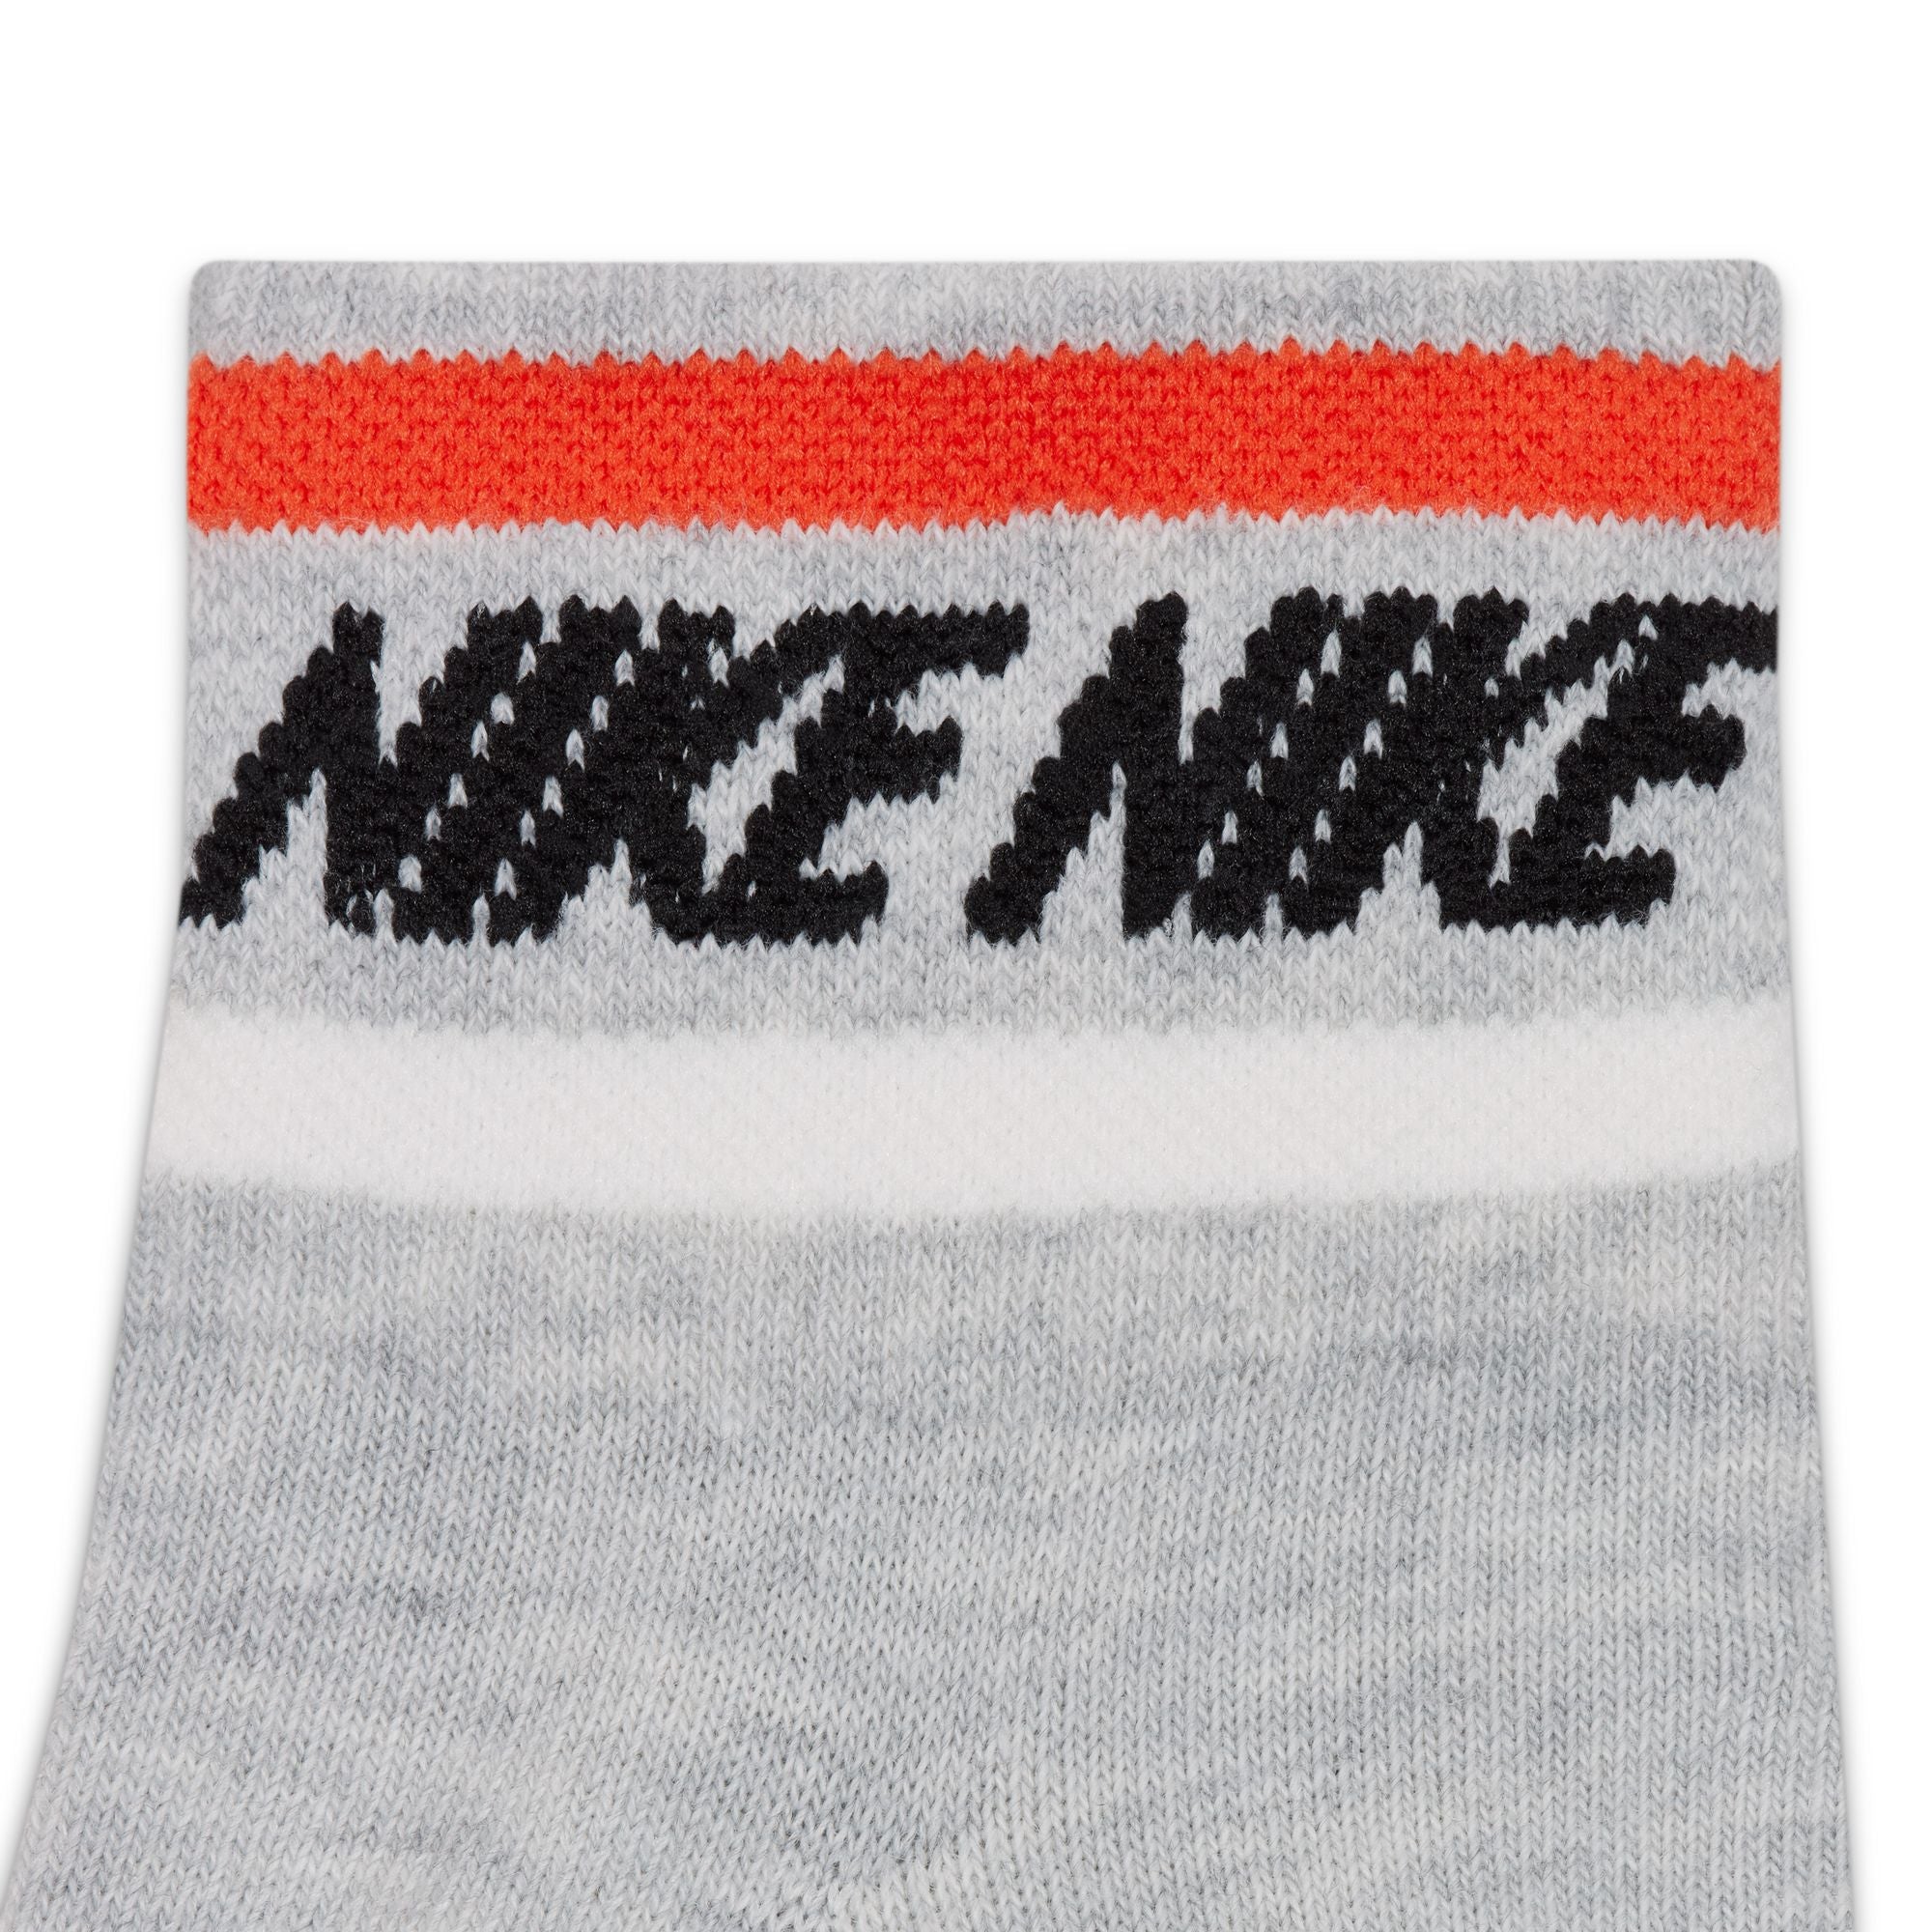 Grey nike ankle socks with red and white stripes and black nike swoosh logo. Free uk shipping over £50